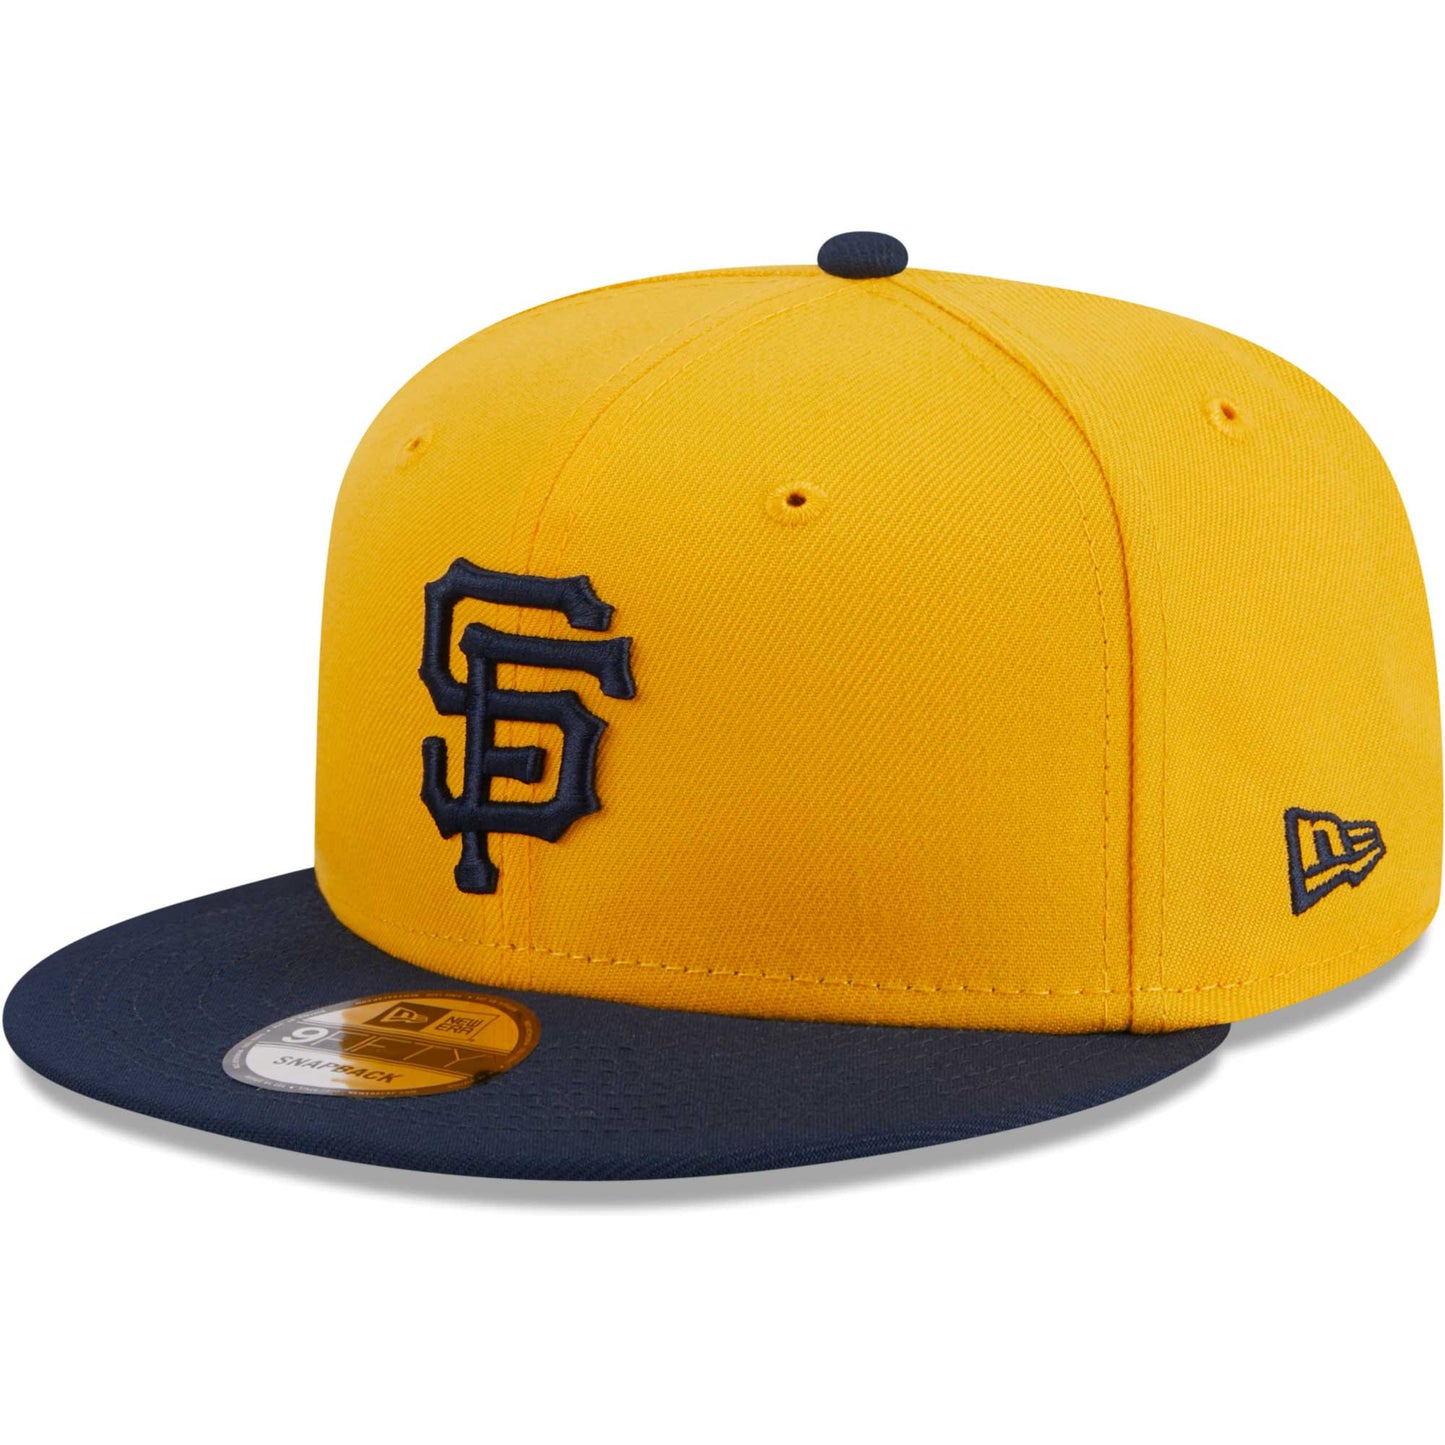 San Francisco Giants New Era Two-Tone Color Pack 9FIFTY Snapback Hat - Gold